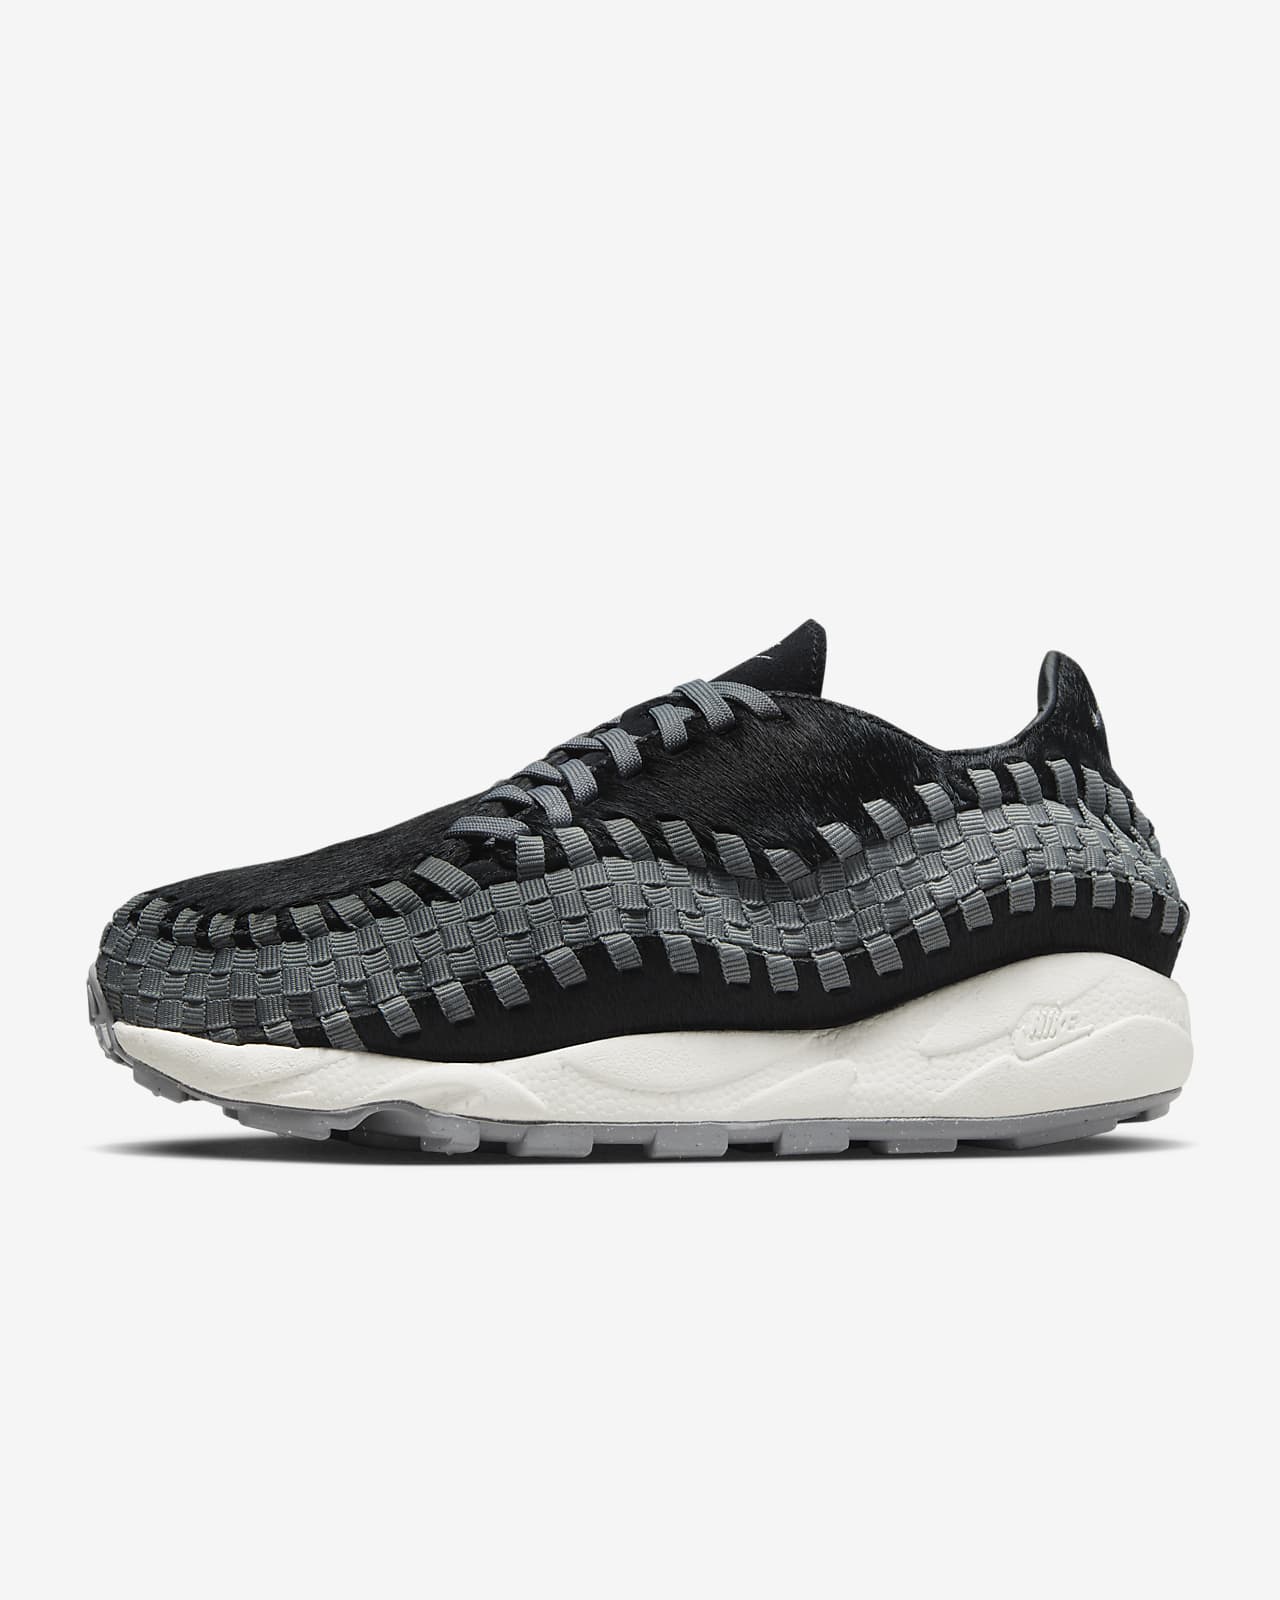 Chaussure Nike Air Footscape Woven pour femme